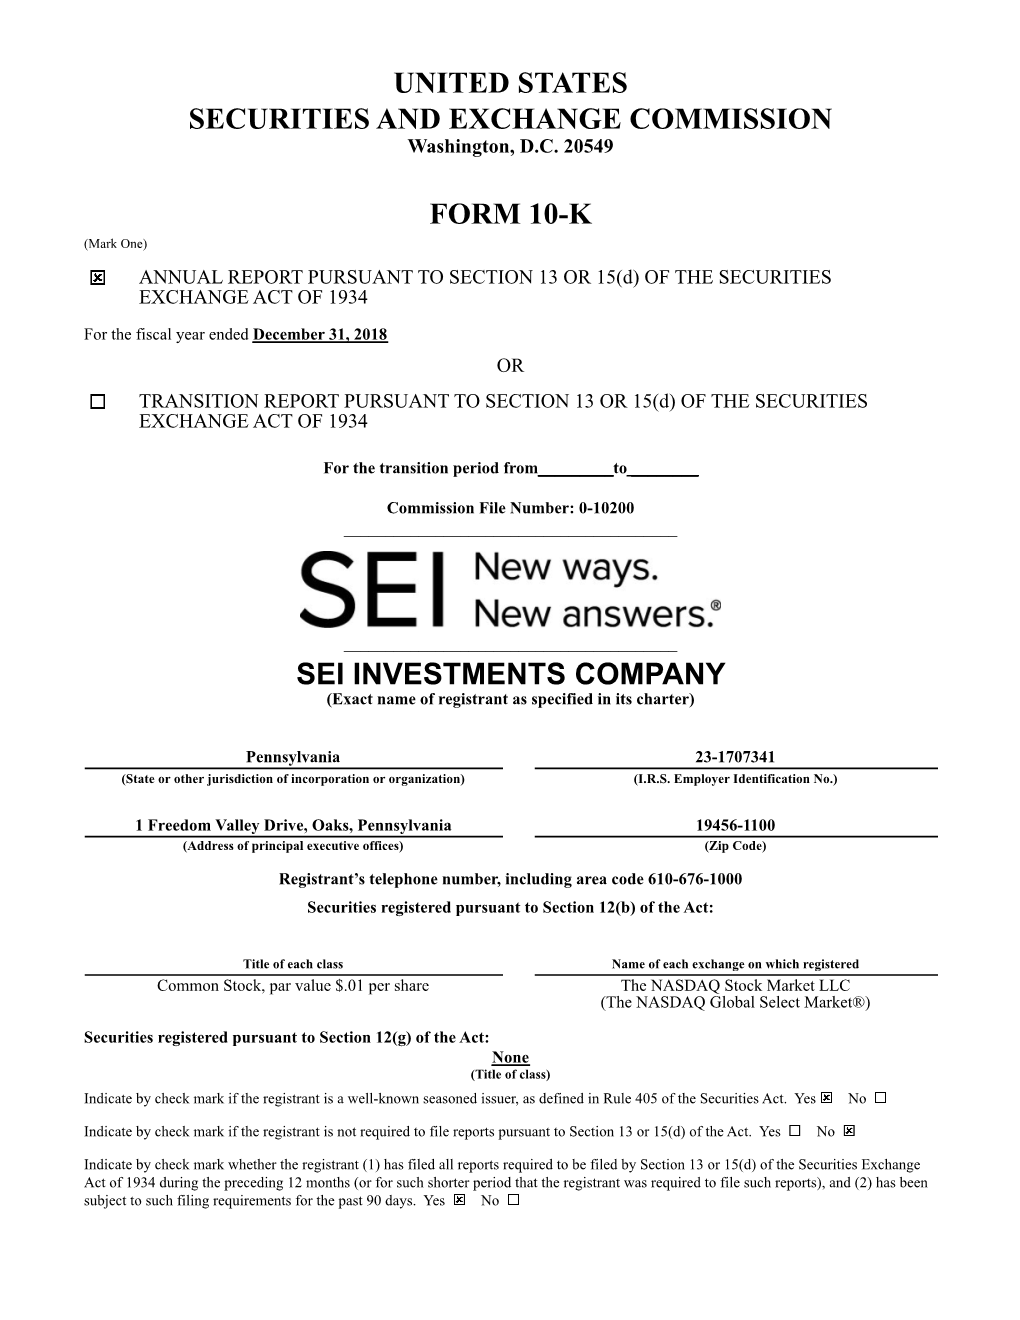 United States Securities and Exchange Commission Form 10-K Sei Investments Company